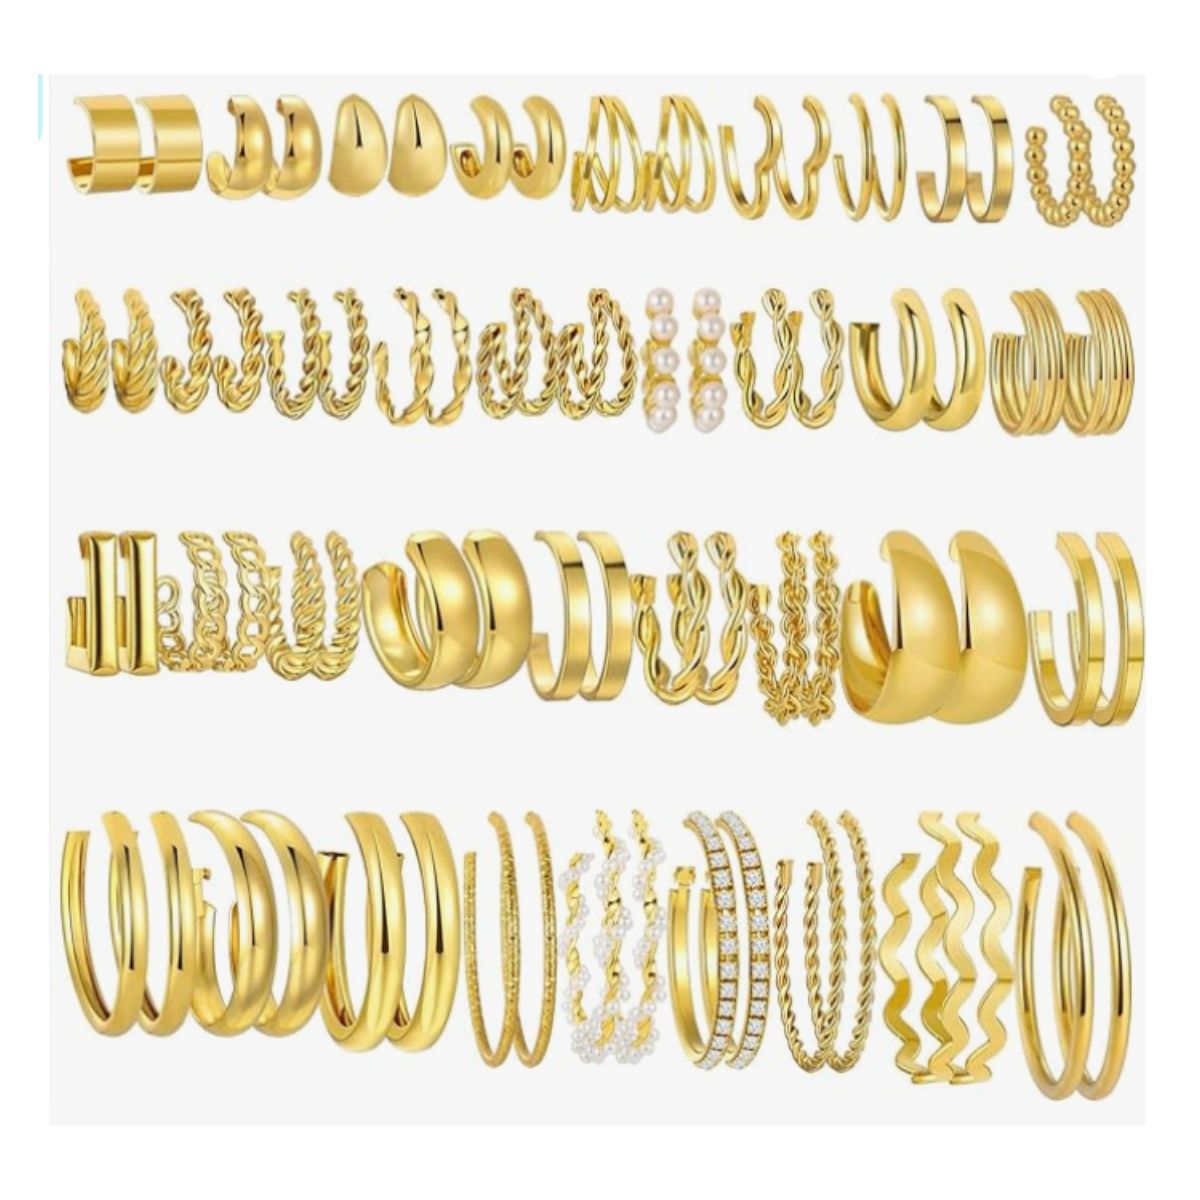 36-pairs fashion earrings for $6+ (55% off) | Smart Savers